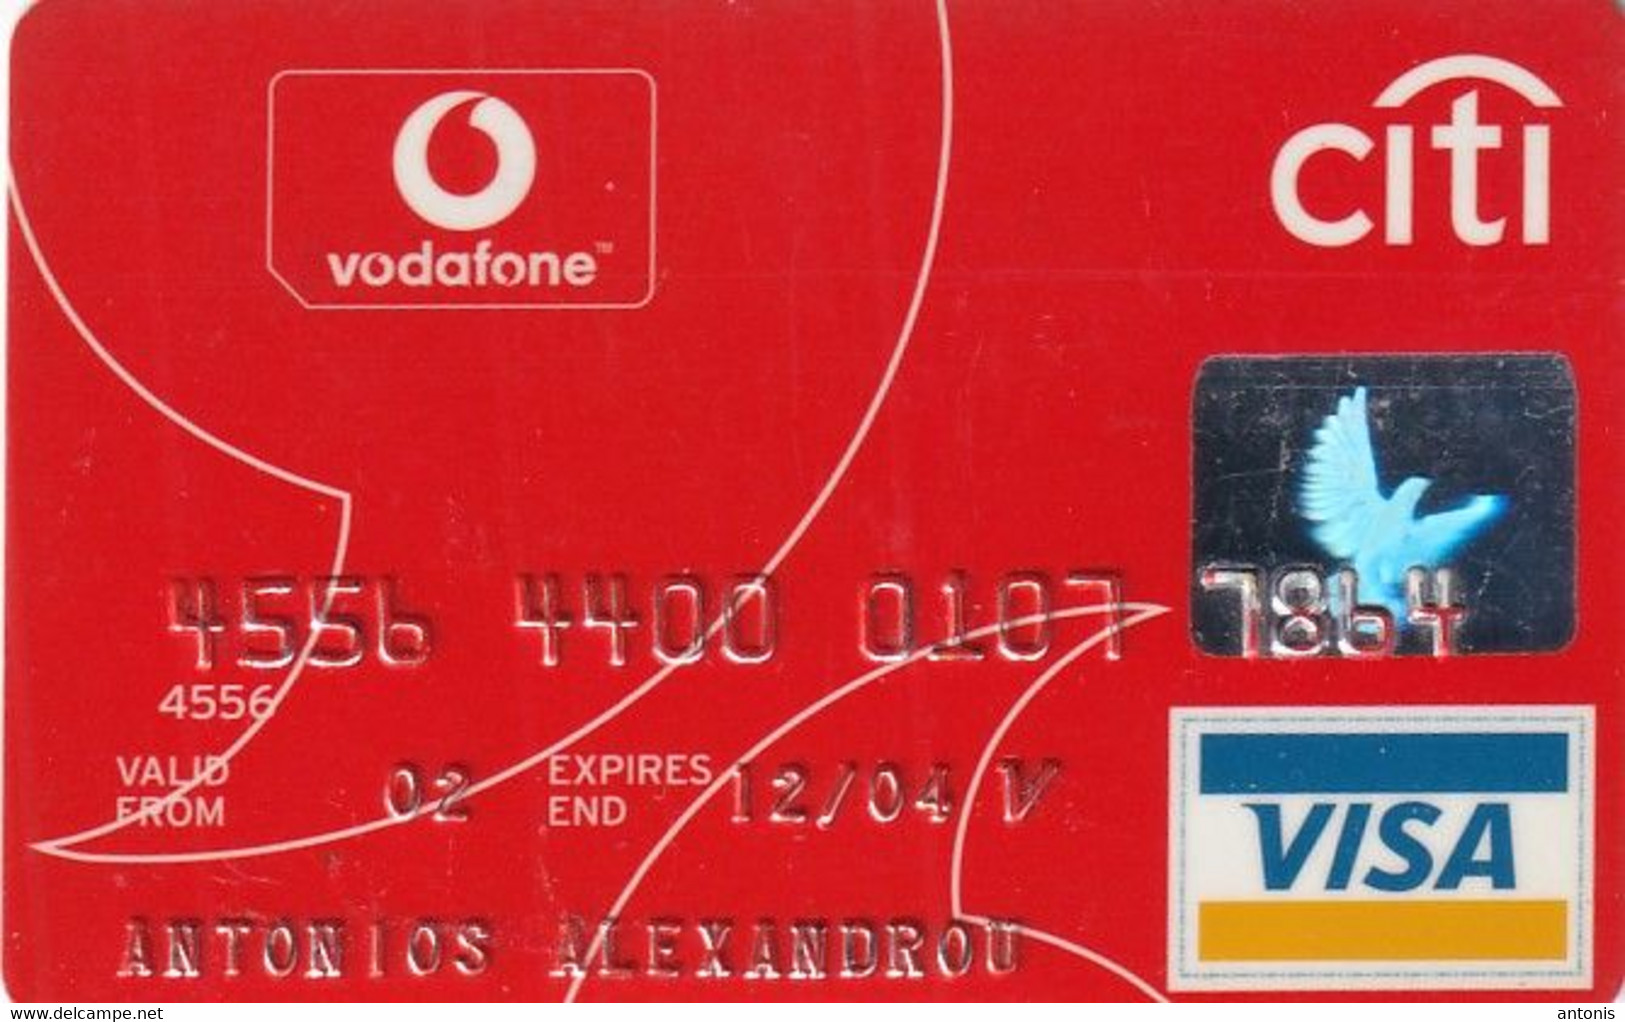 GREECE - Vodafone, CitiBank Visa(reverse Schlumberger GB), 08/02, Used - Credit Cards (Exp. Date Min. 10 Years)